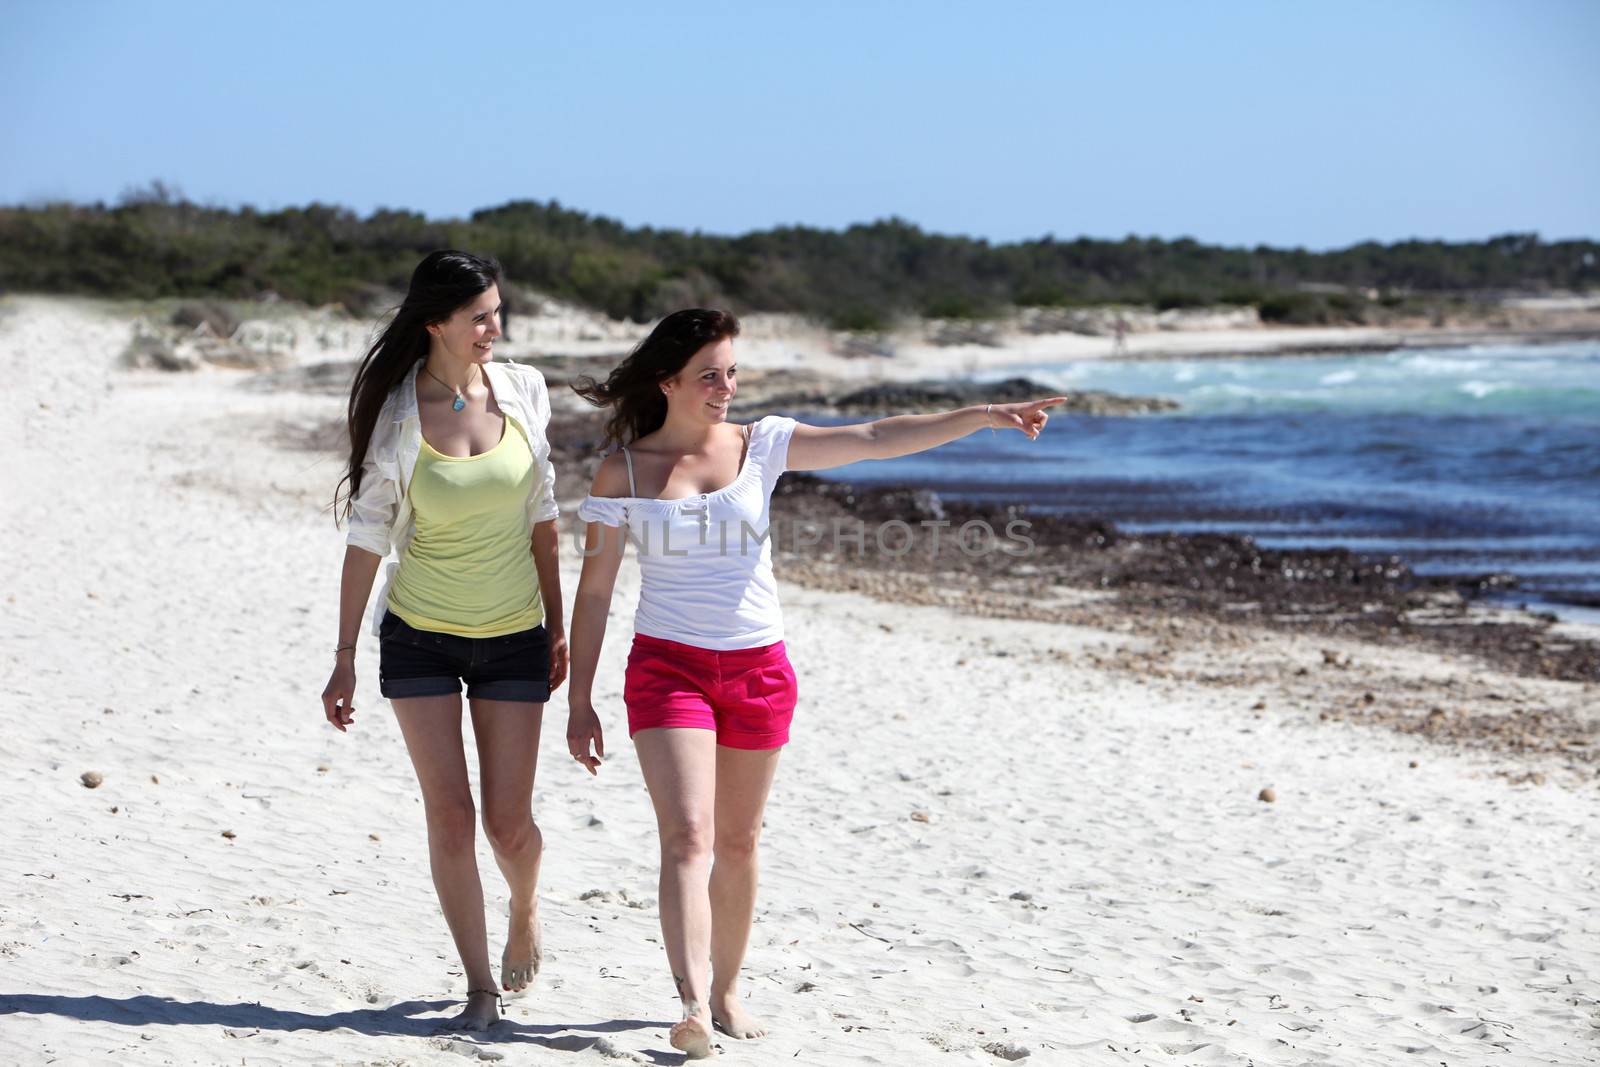 Two attractive woman walking on a beach by Farina6000